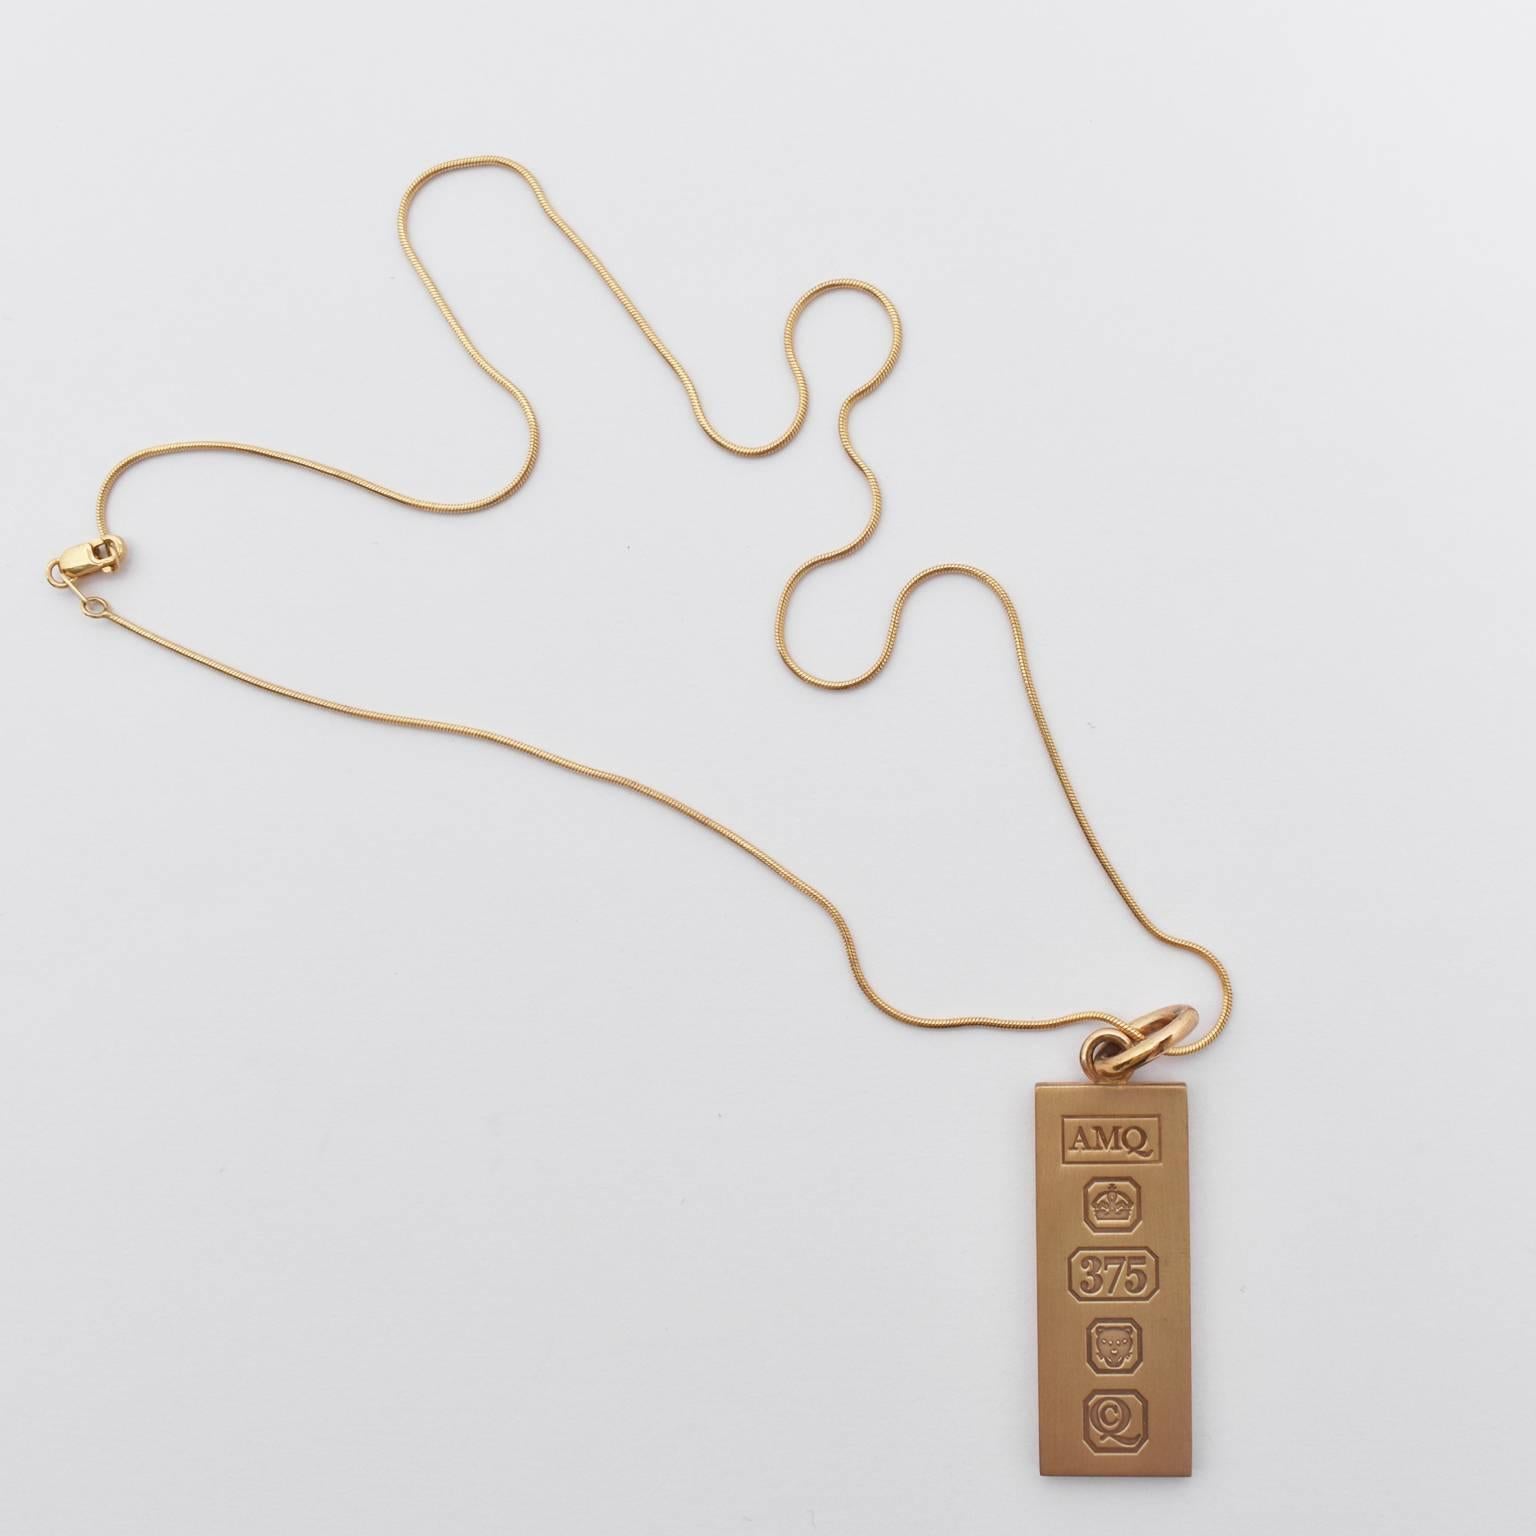 A gold tag pendant necklace by celebrated jewellery designer Shaun Leane for Alexander McQueen. The pair had a strong working relationship with Leane creating some of the most extravagant and sculptural pieces for McQueen’s theatrical runway shows.